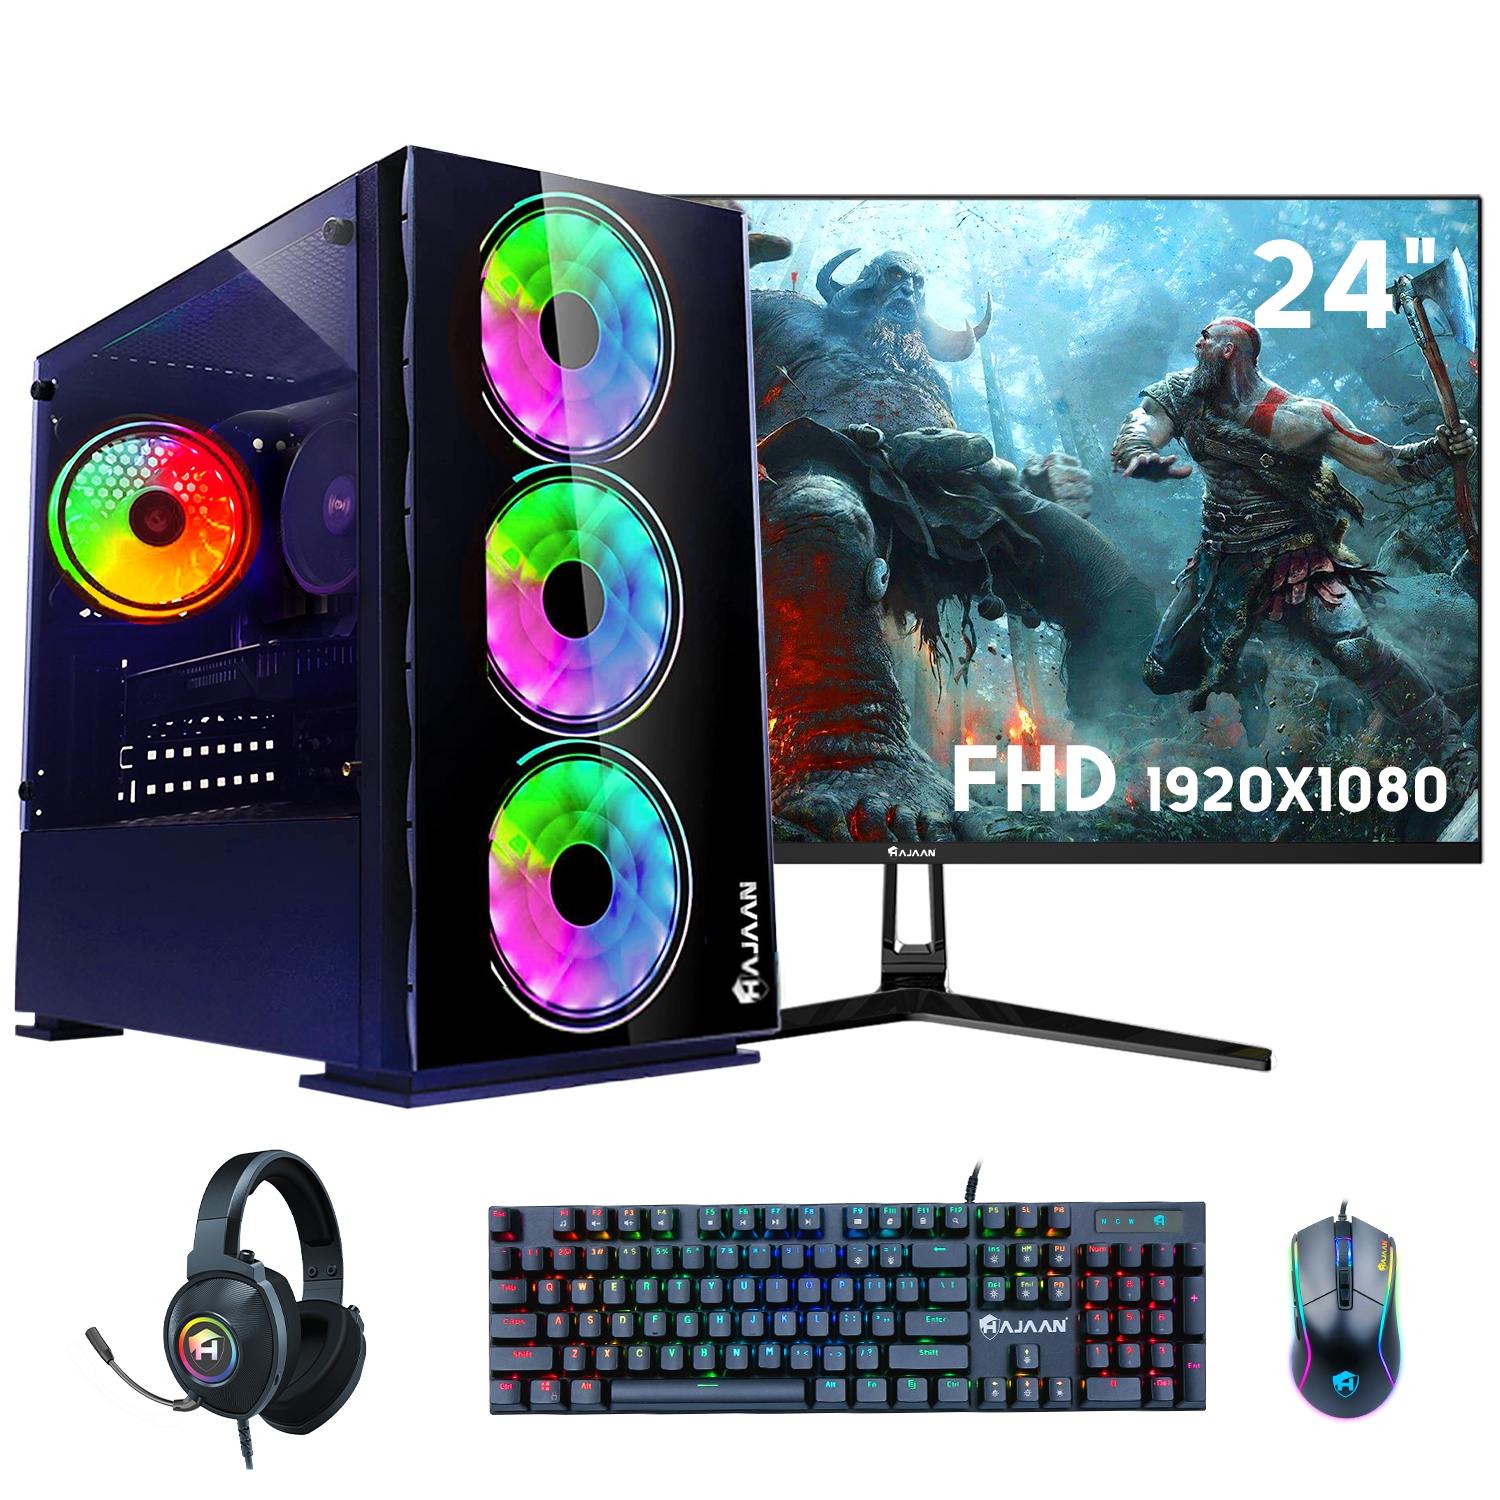 Gaming PC Desktop Tower, Intel Core i7 up to 4.0GHz, AMD Radeon RX 580 8GB, 32GB RAM 1TB SSD, 24″ Inch Curve Gaming Monitor, Gaming Keyboard Mouse, WiFi, Windows 10